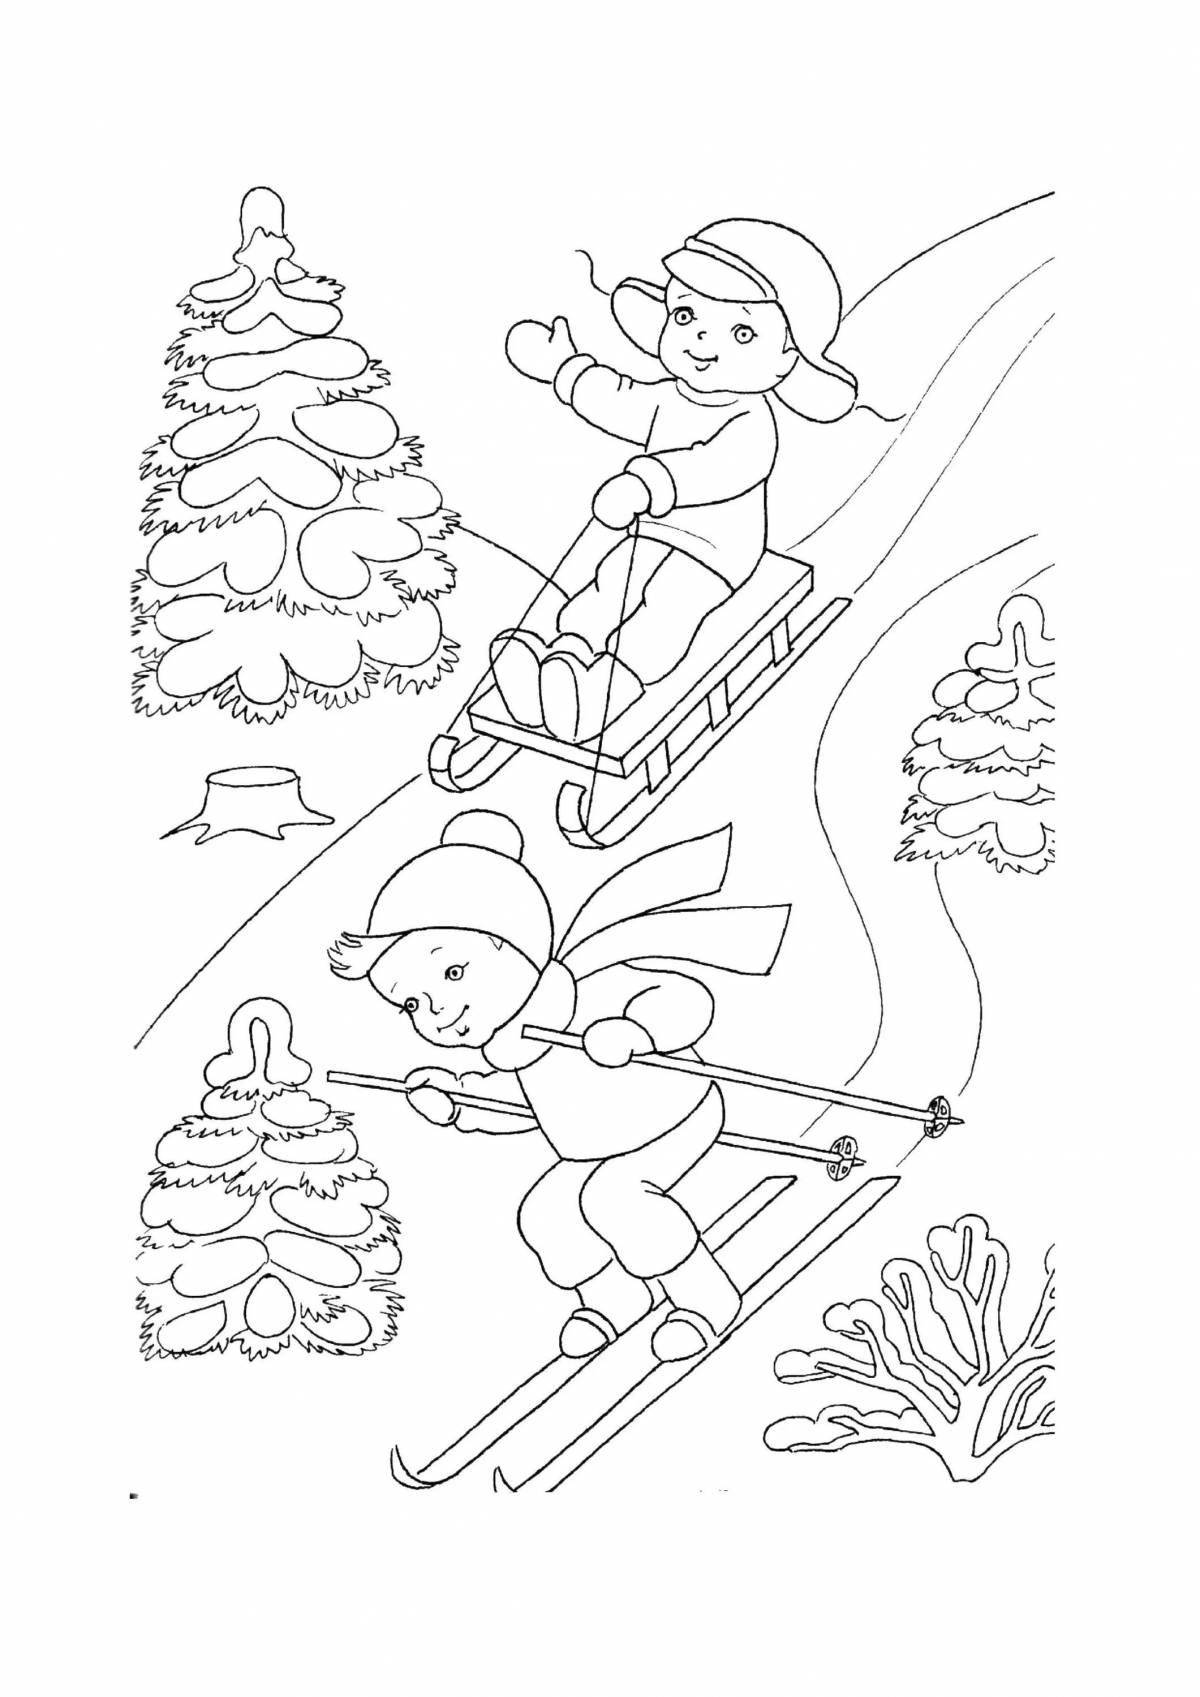 Coloring page joyful kys turaly